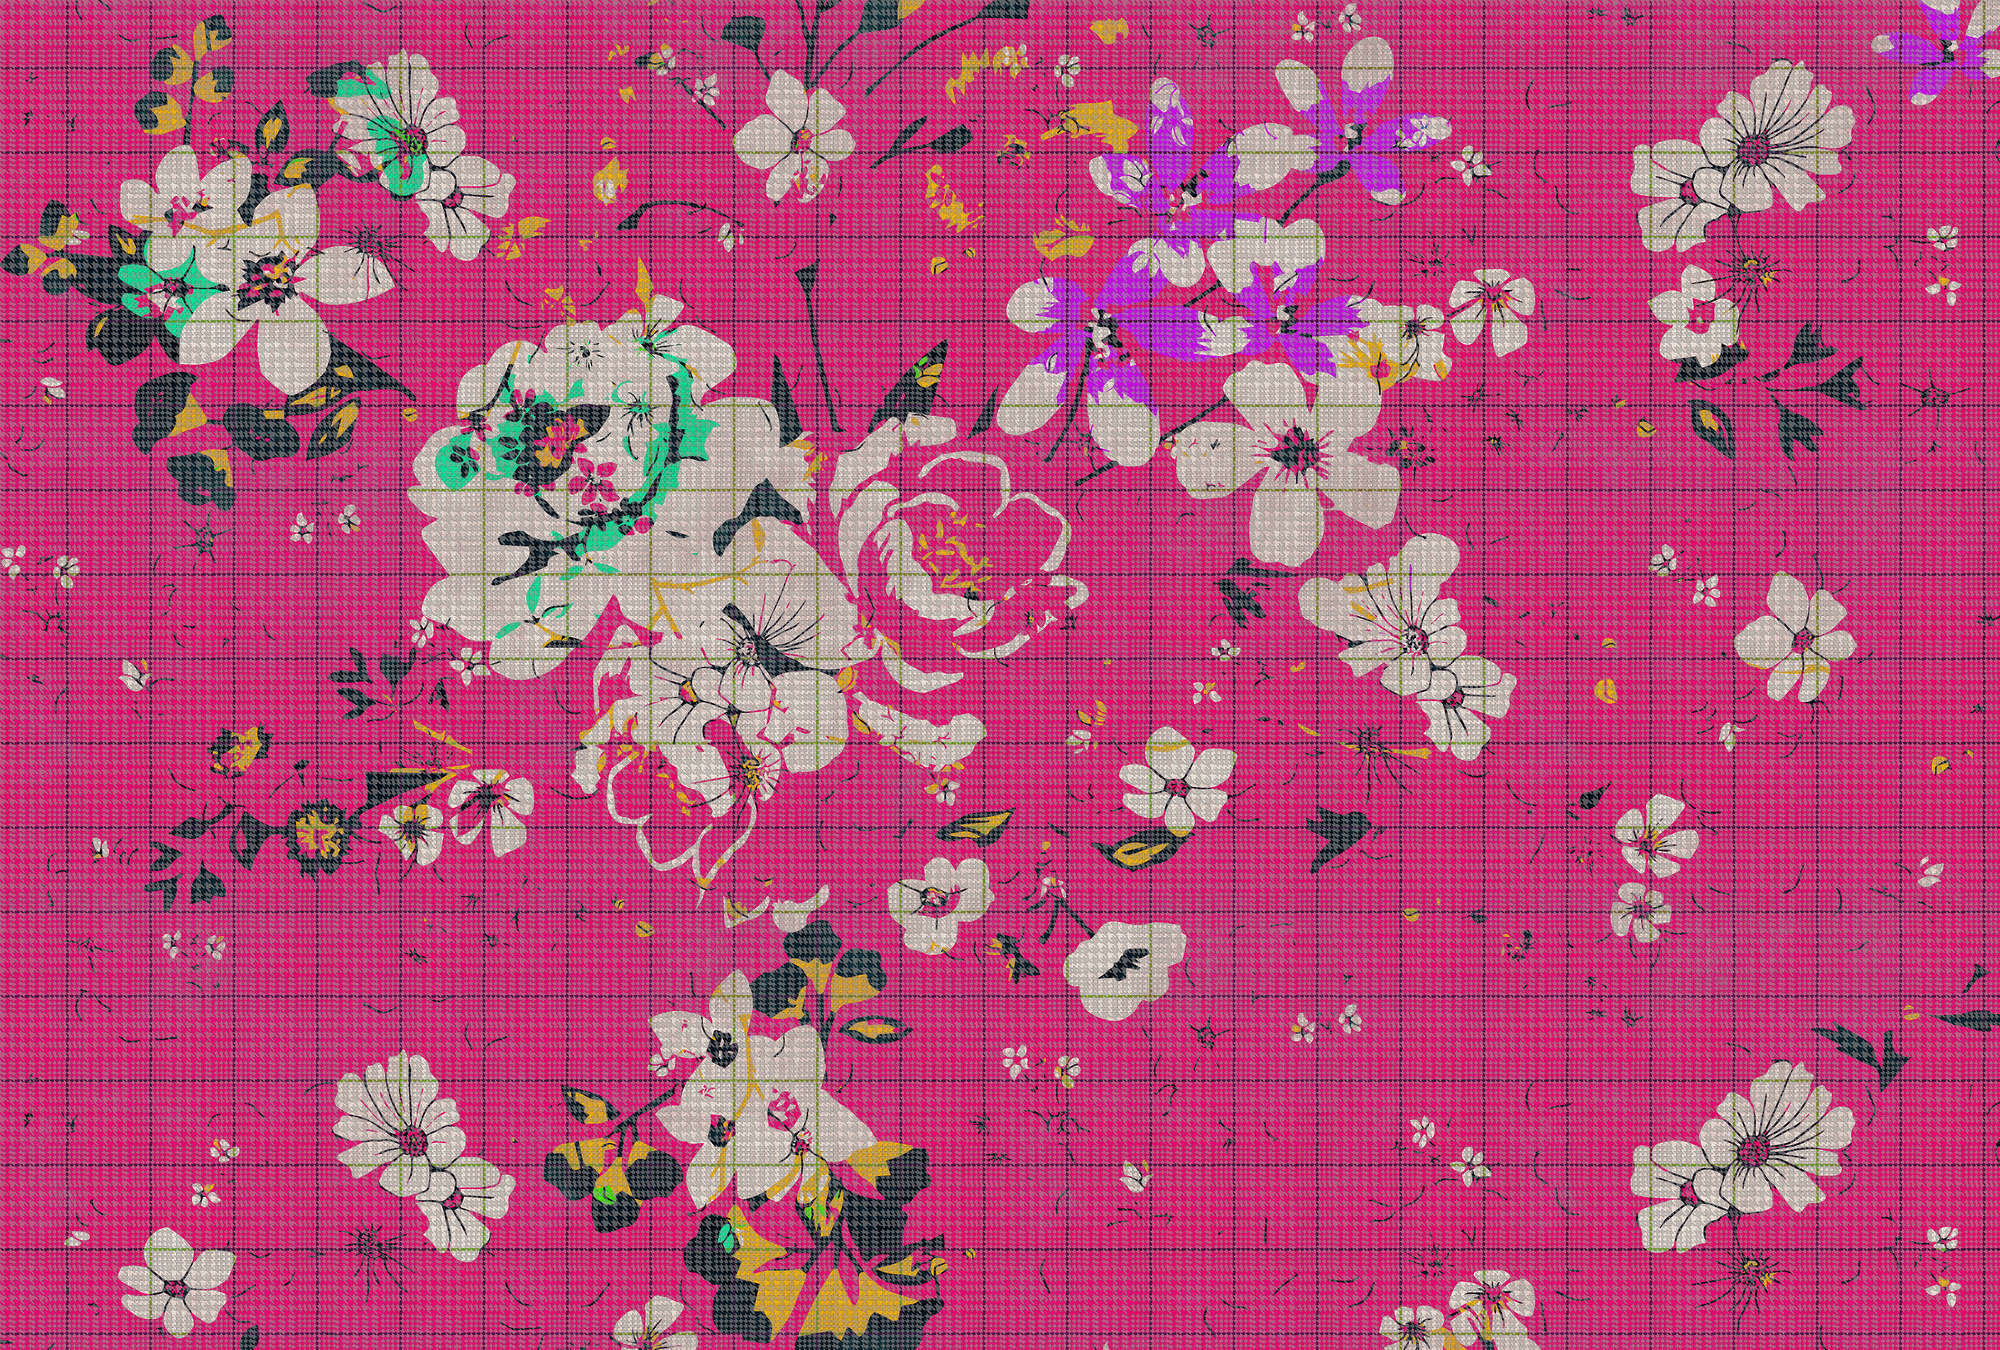             Flower plaid 2 - Photo wallpaper in checkered optics colourful flower mosaic Pink - Green, Pink | structure non-woven
        